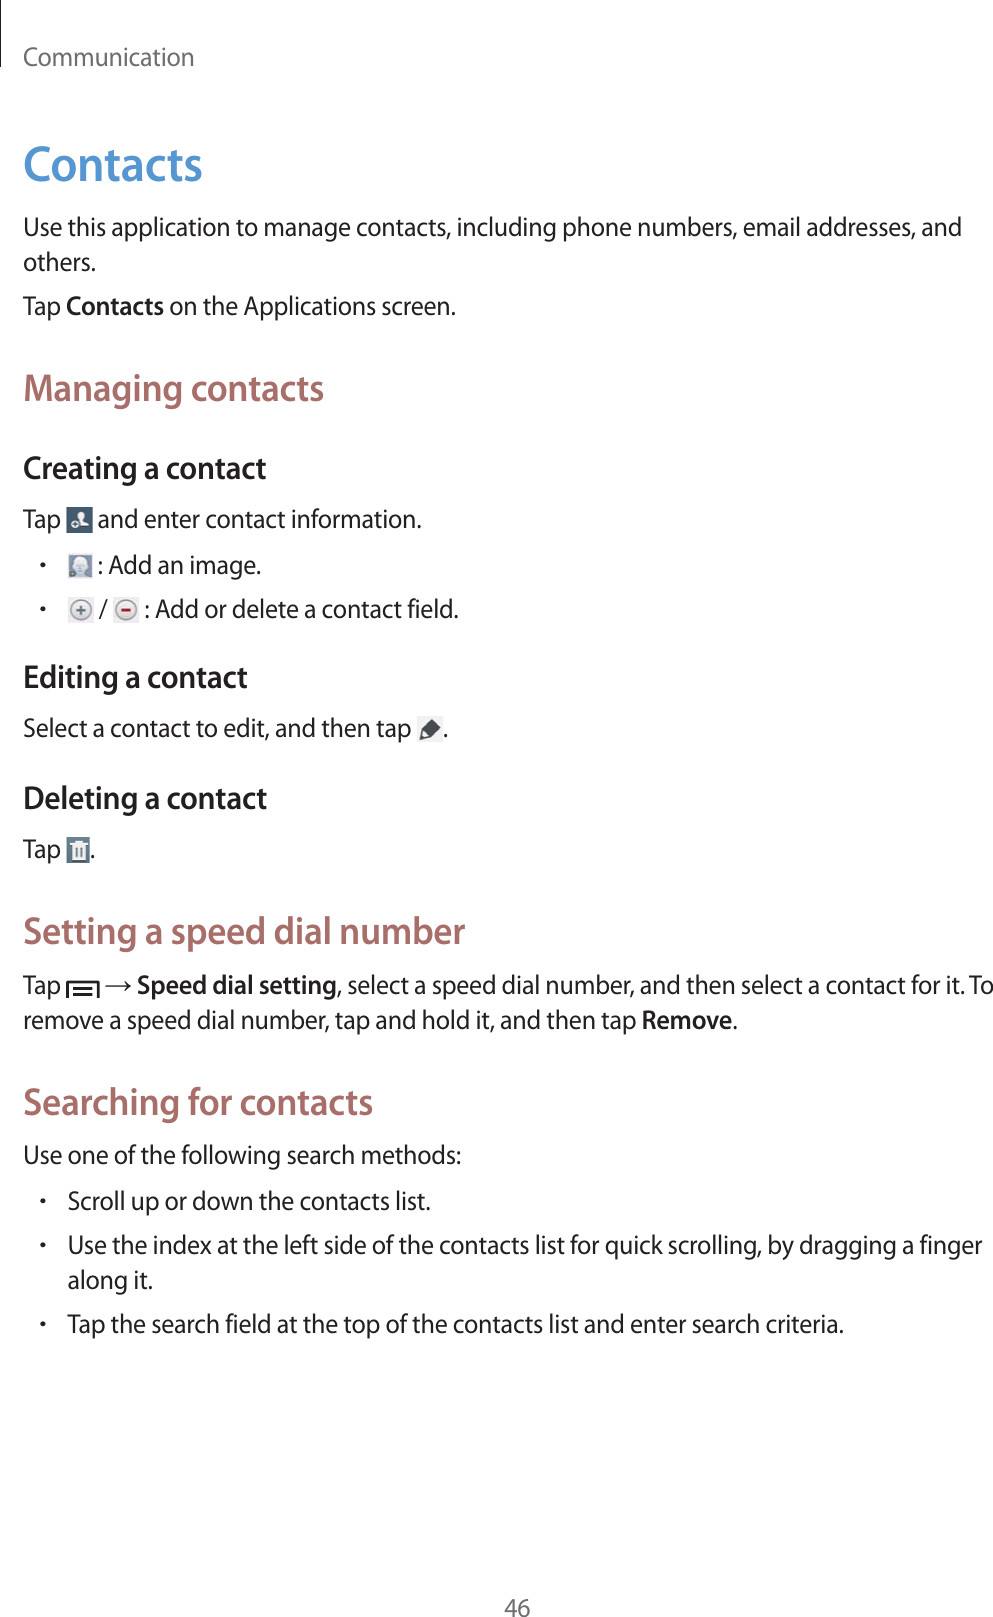 Communication46ContactsUse this application to manage contacts, including phone numbers, email addresses, and others.Tap Contacts on the Applications screen.Managing contactsCreating a contactTap   and enter contact information.r : Add an image.r /   : Add or delete a contact field.Editing a contactSelect a contact to edit, and then tap  .Deleting a contactTap  .Setting a speed dial numberTap   ĺ Speed dial setting, select a speed dial number, and then select a contact for it. To remove a speed dial number, tap and hold it, and then tap Remove.Searching for contactsUse one of the following search methods:rScroll up or down the contacts list.rUse the index at the left side of the contacts list for quick scrolling, by dragging a finger along it.rTap the search field at the top of the contacts list and enter search criteria.